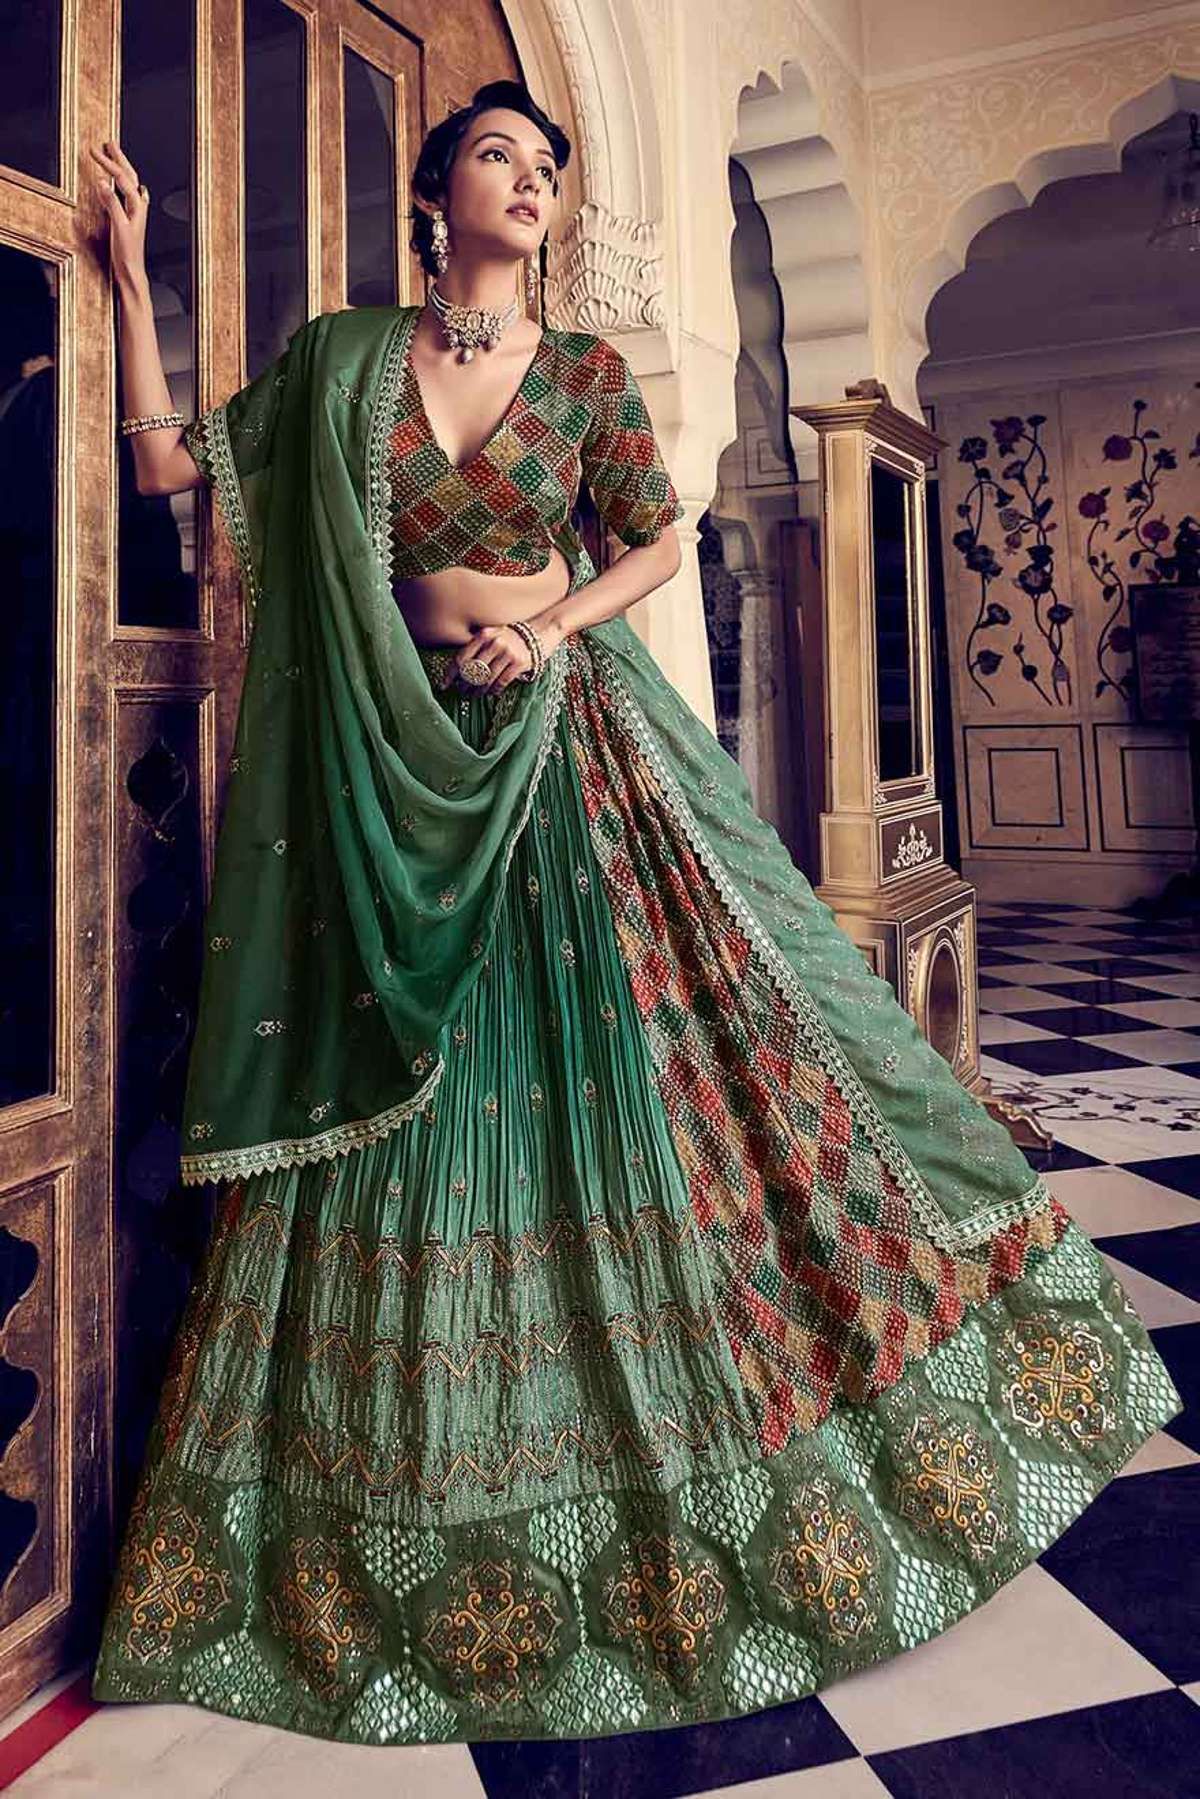 Georgette Fabric Sea green Color embroidered Lehenga and Choli with thread  & Zircon work with net fabric Dupatta